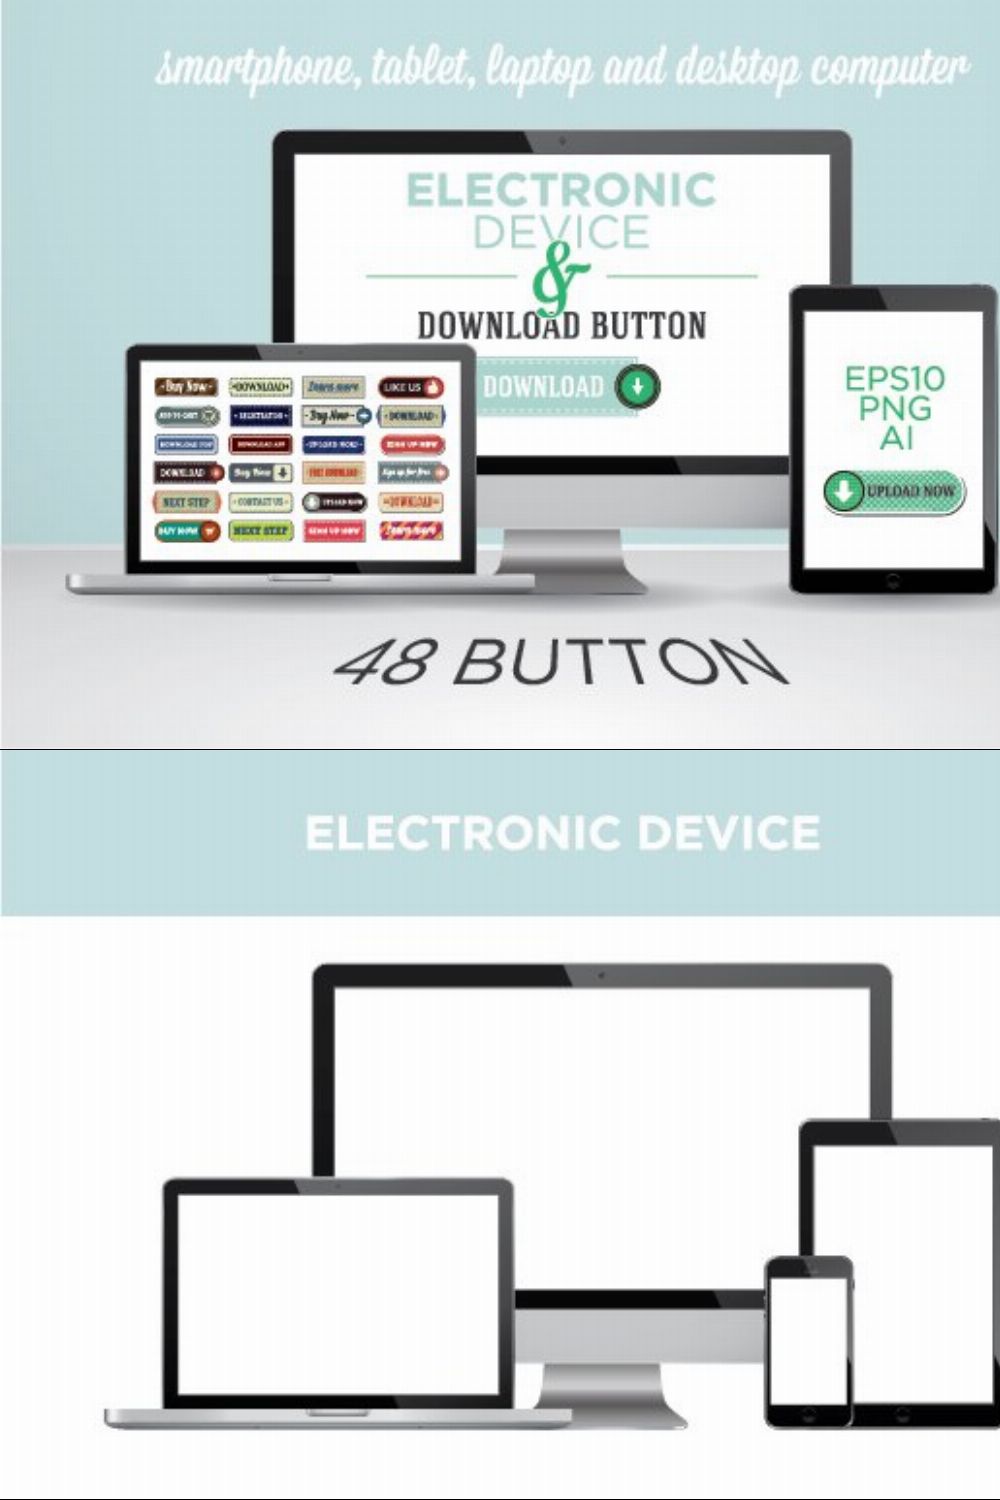 Electronic Device, Download button pinterest preview image.